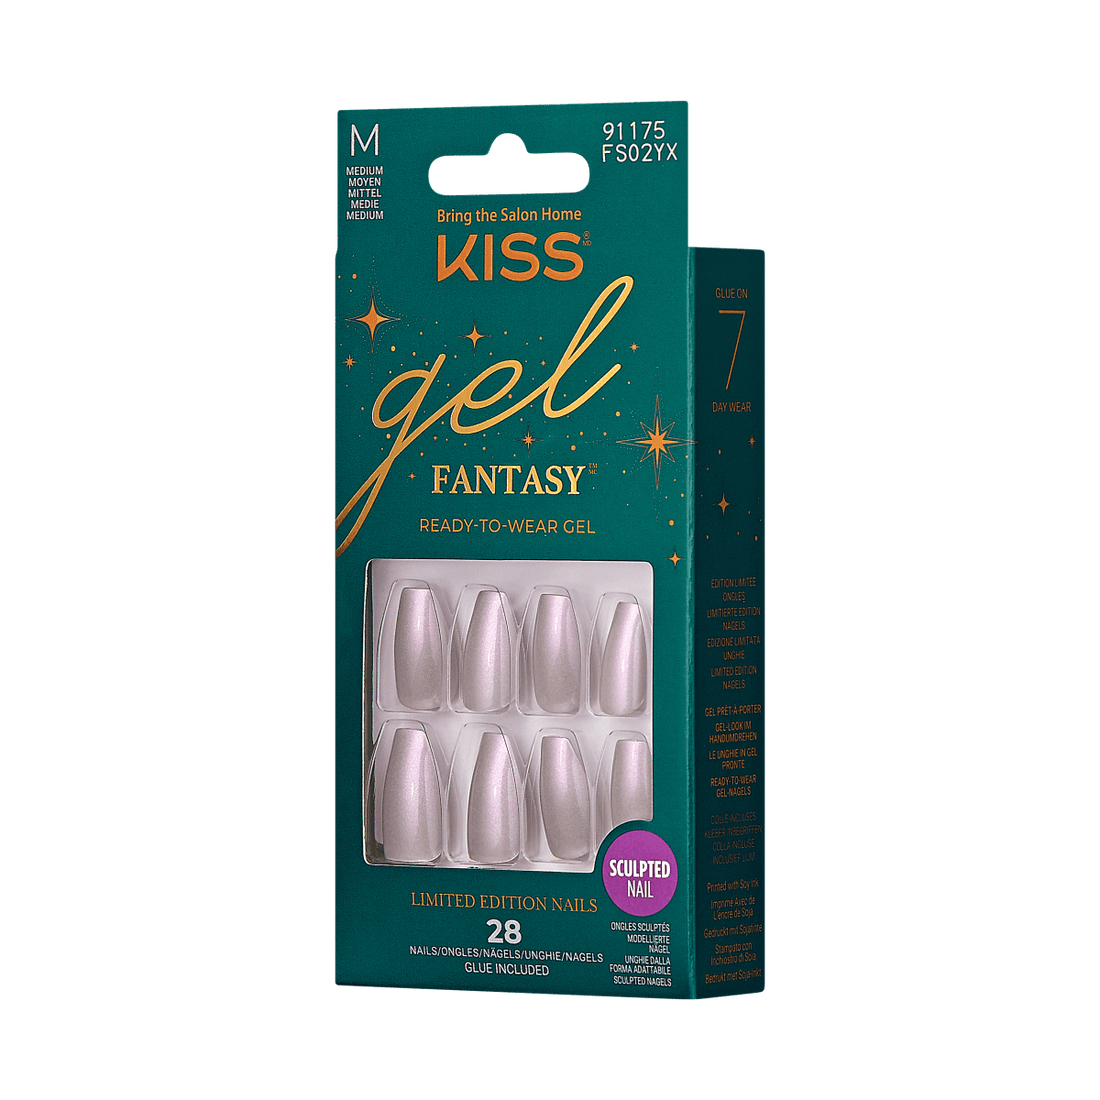 KISS Gel Fantasy, Press-On Nails, To Sparkle, Silver, Med Coffin, 28ct